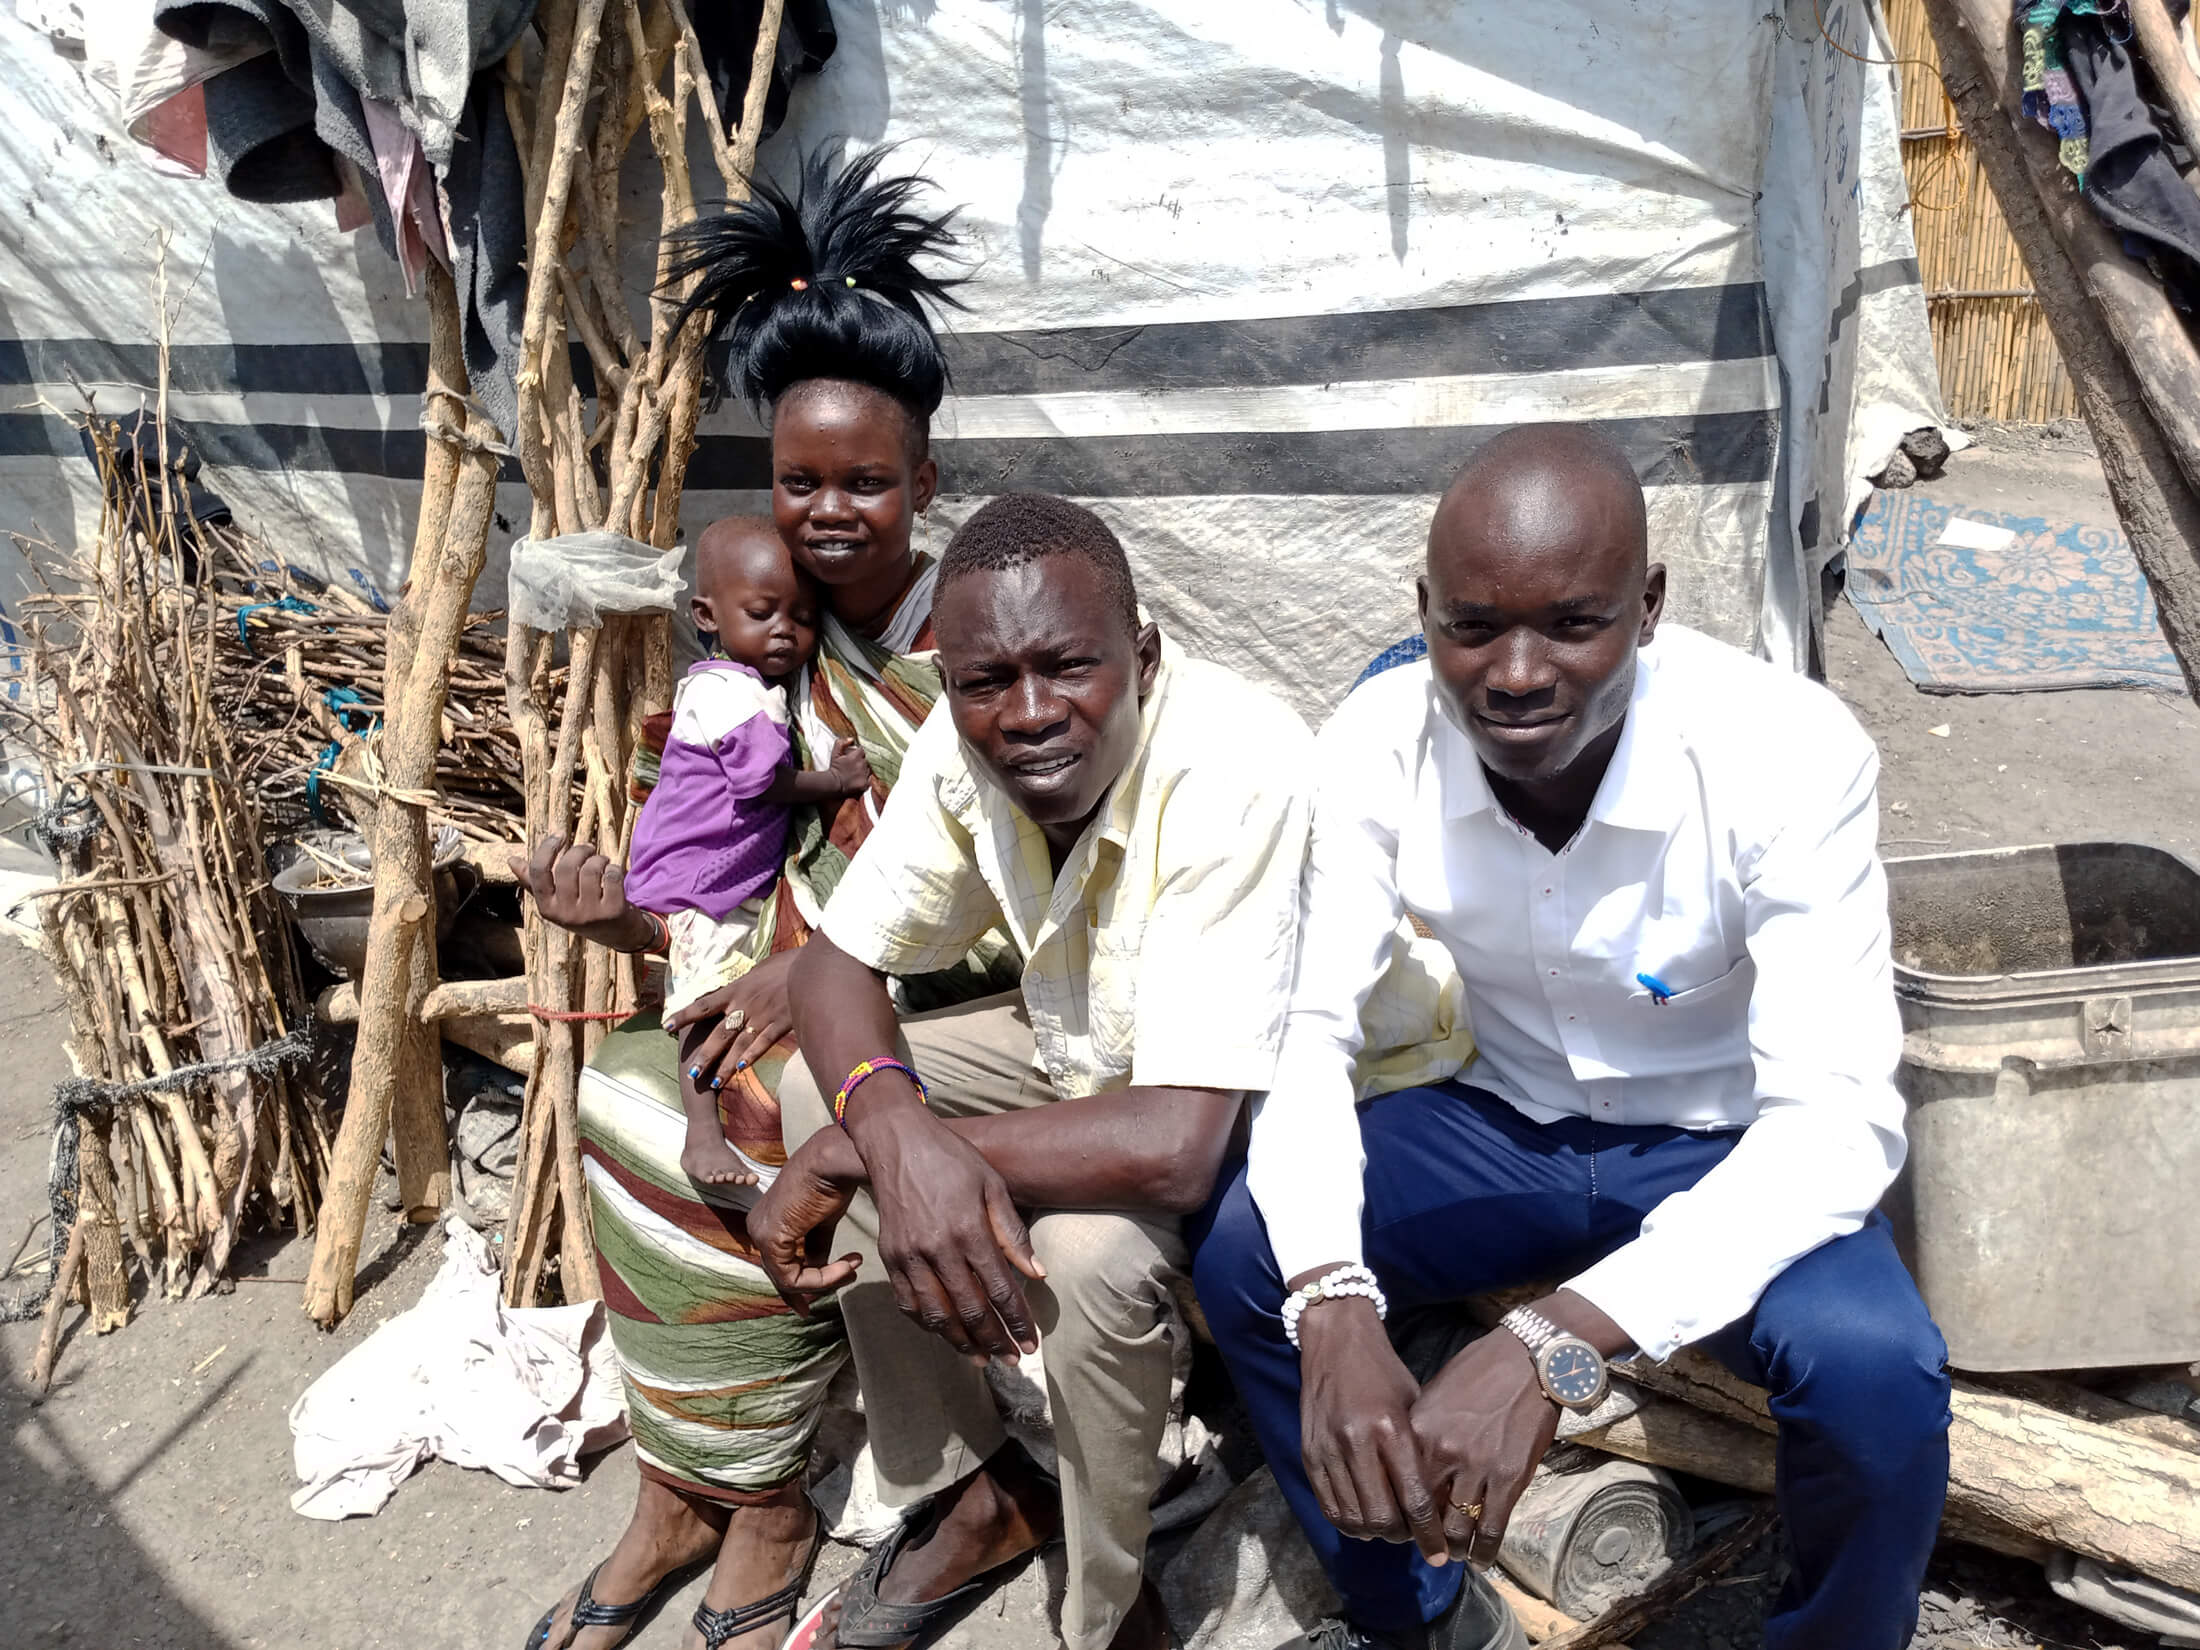 Phillip Daniel Awuo (center) sits with his wife, child and Duku Evans Chaplain, an International Medical Corps MHPSS Officer who works in Malakal.